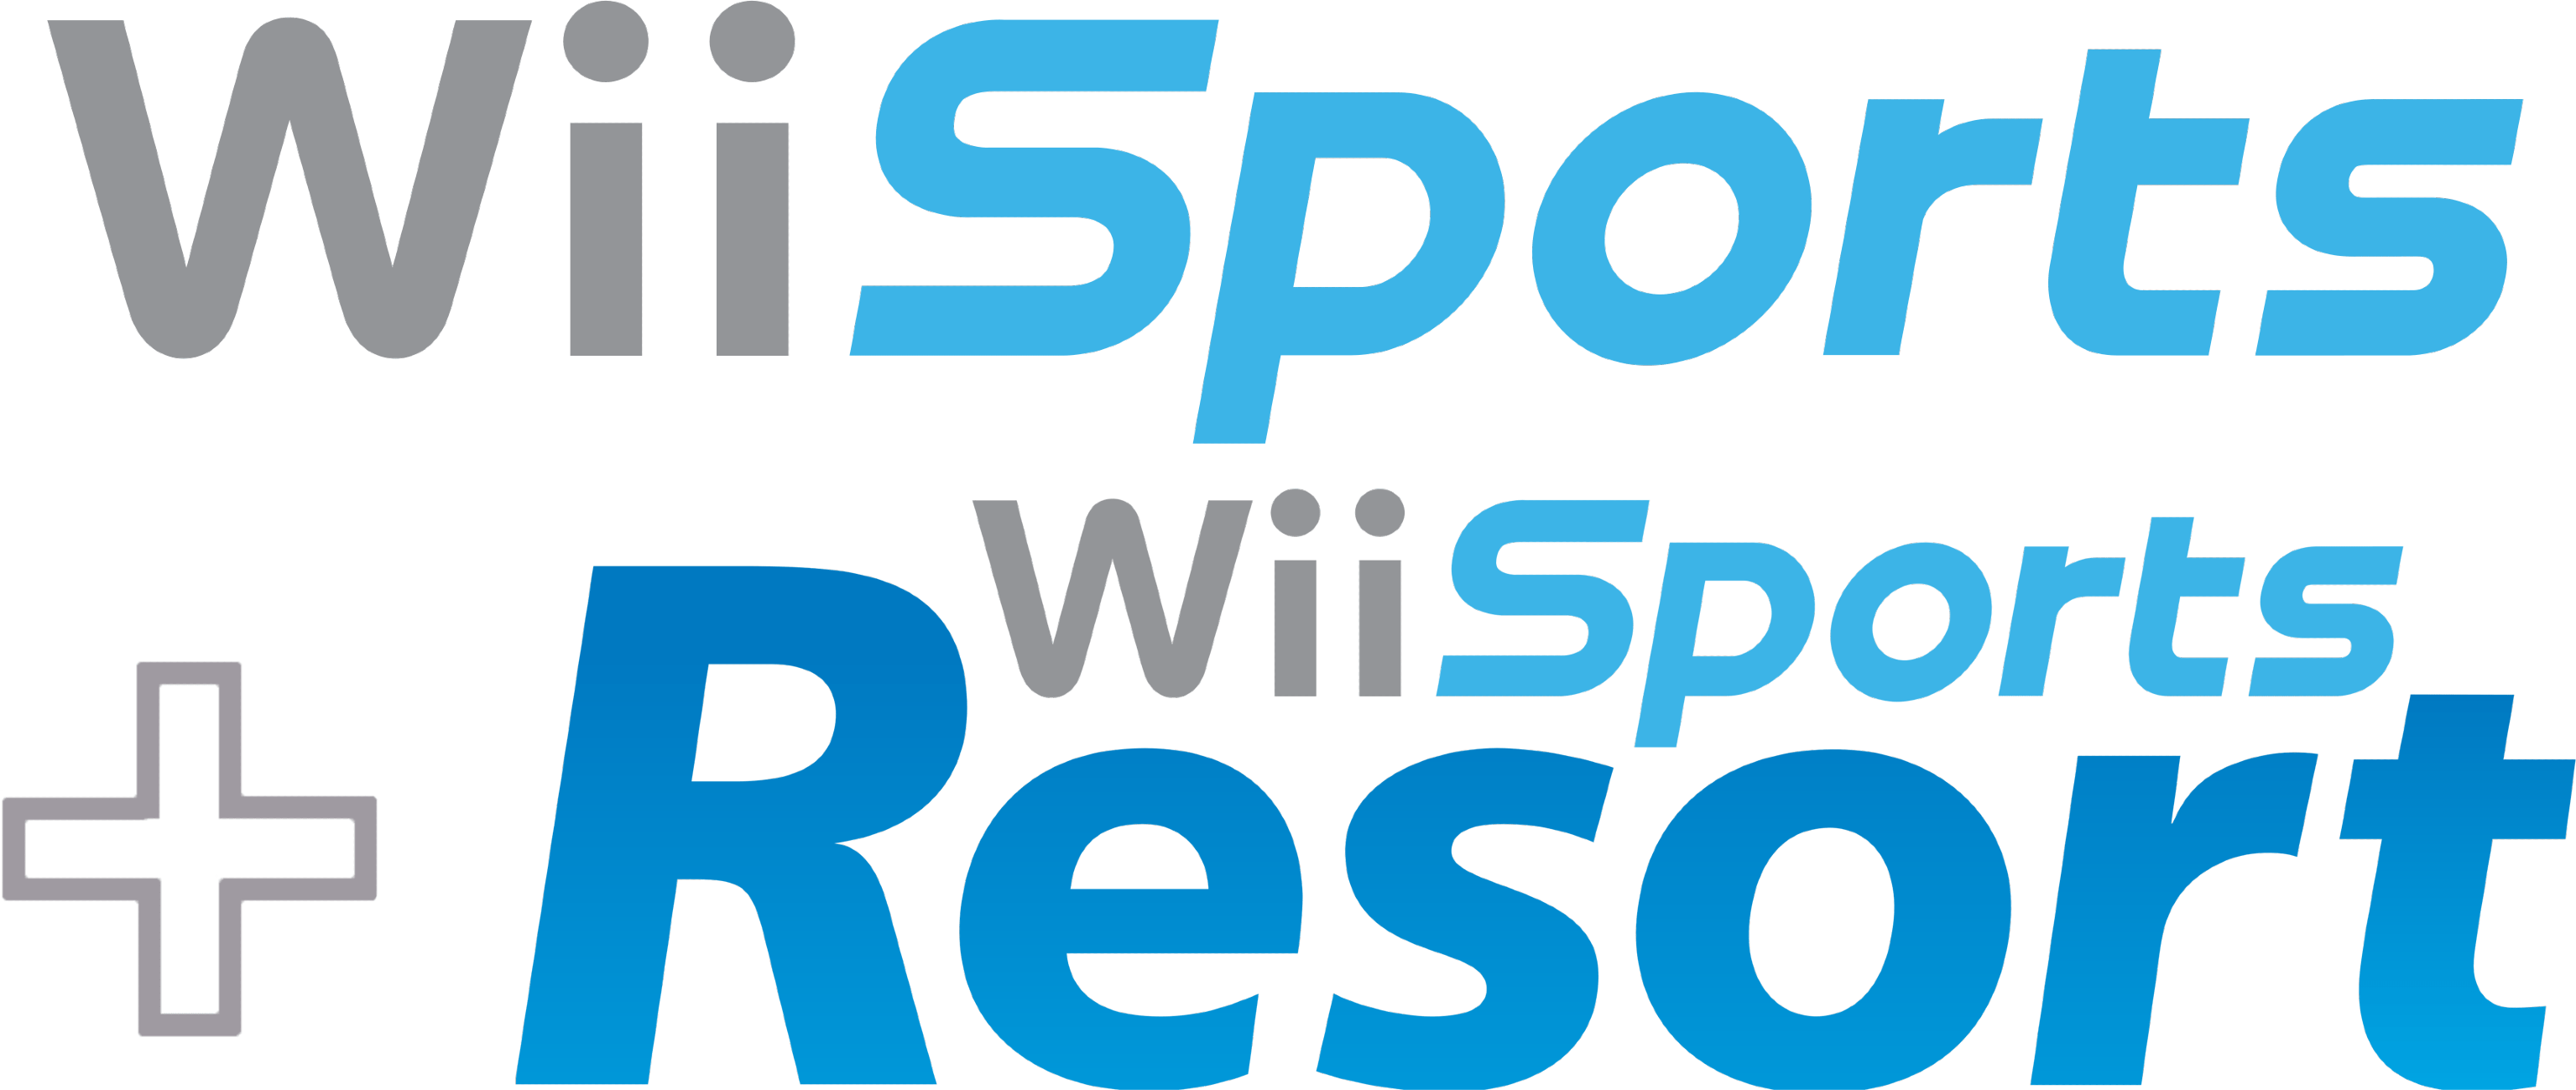 Wii Sports Logo Background PNG